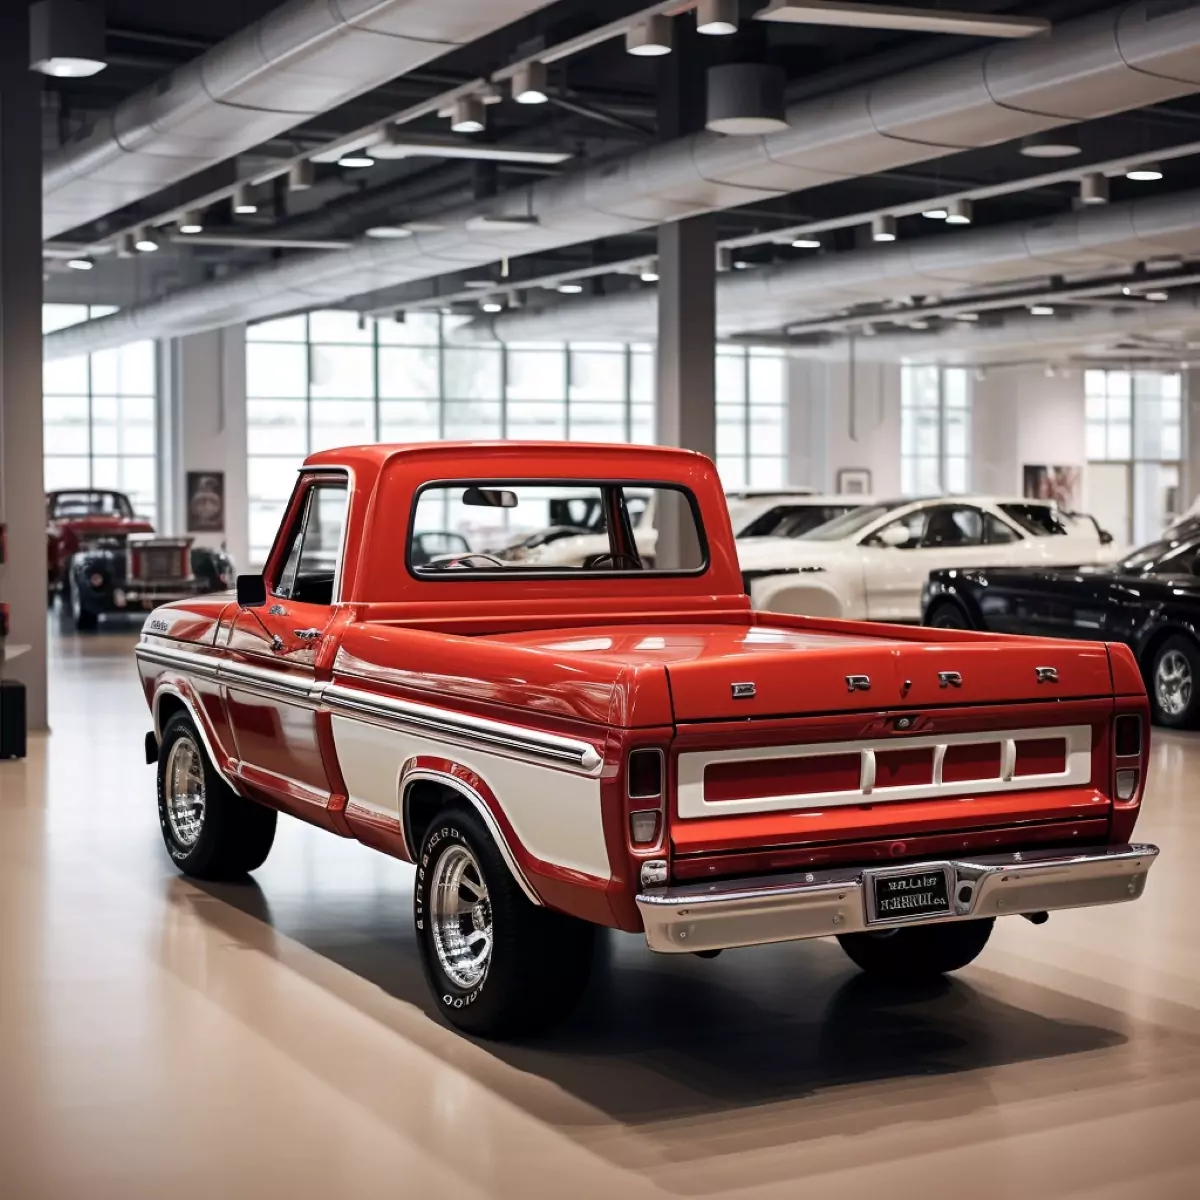 Clássica Ford F-100 / Foto: Planet Cars